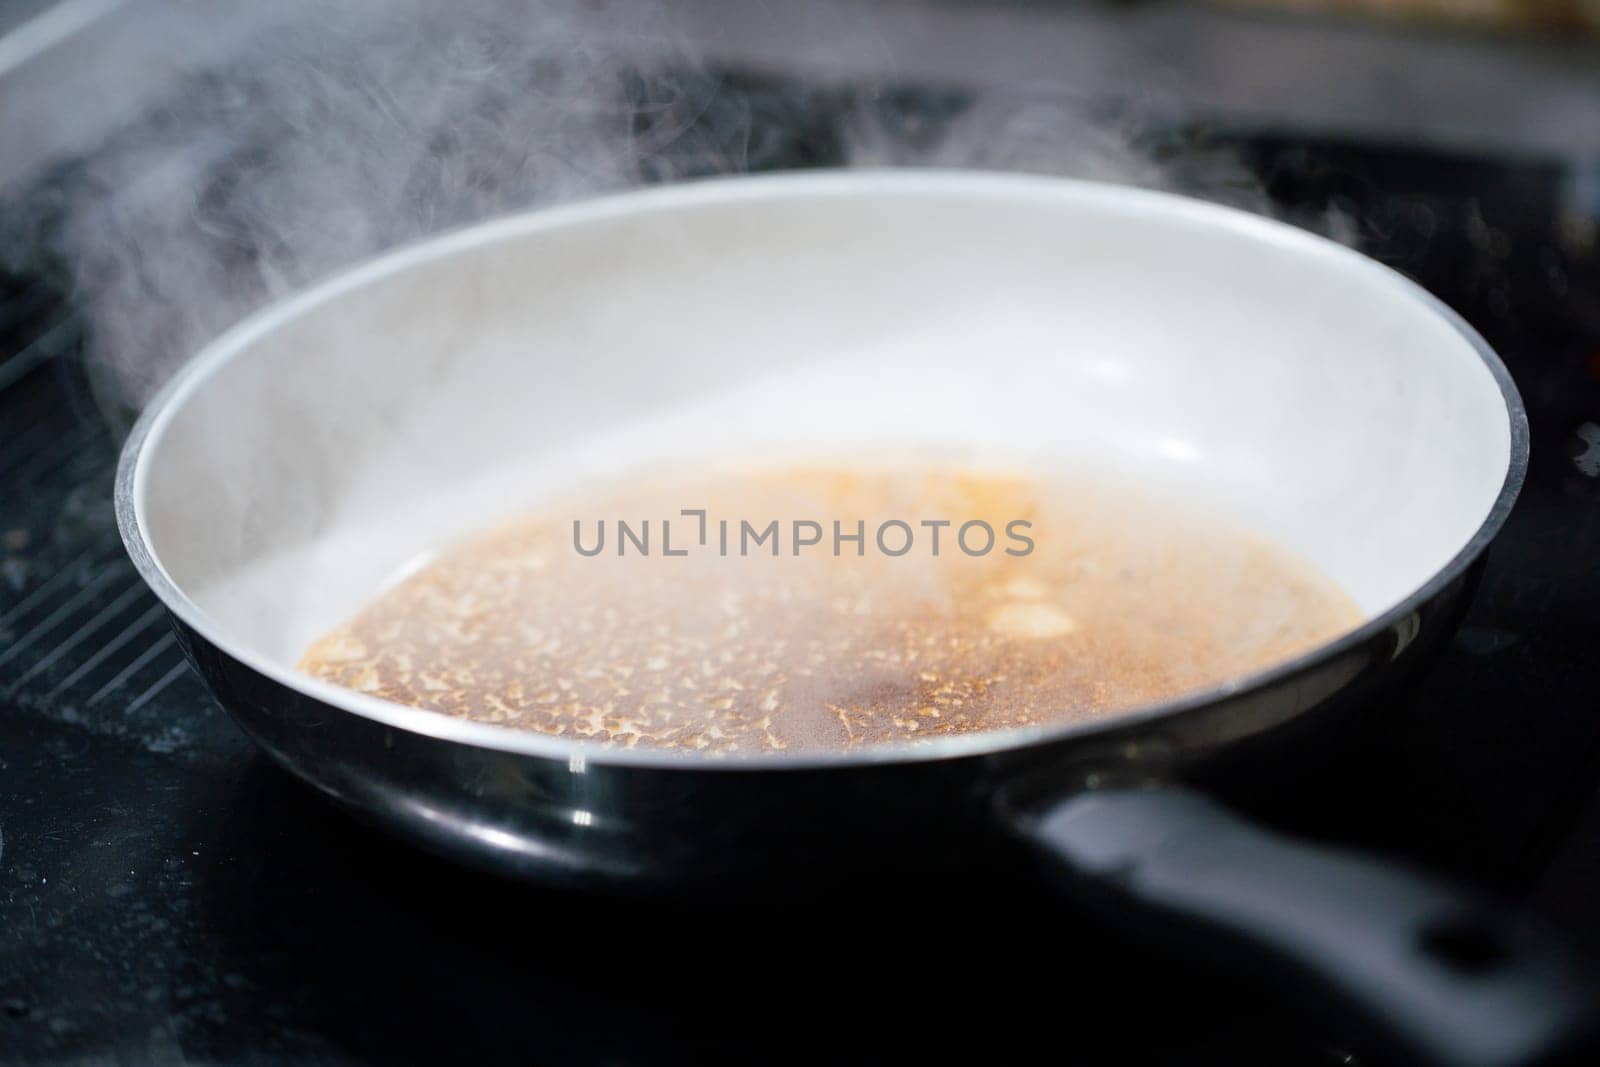 A large frying pan stands on the induction cooker and inside it is a pancake dough that is fried. The water evaporates from the pan.